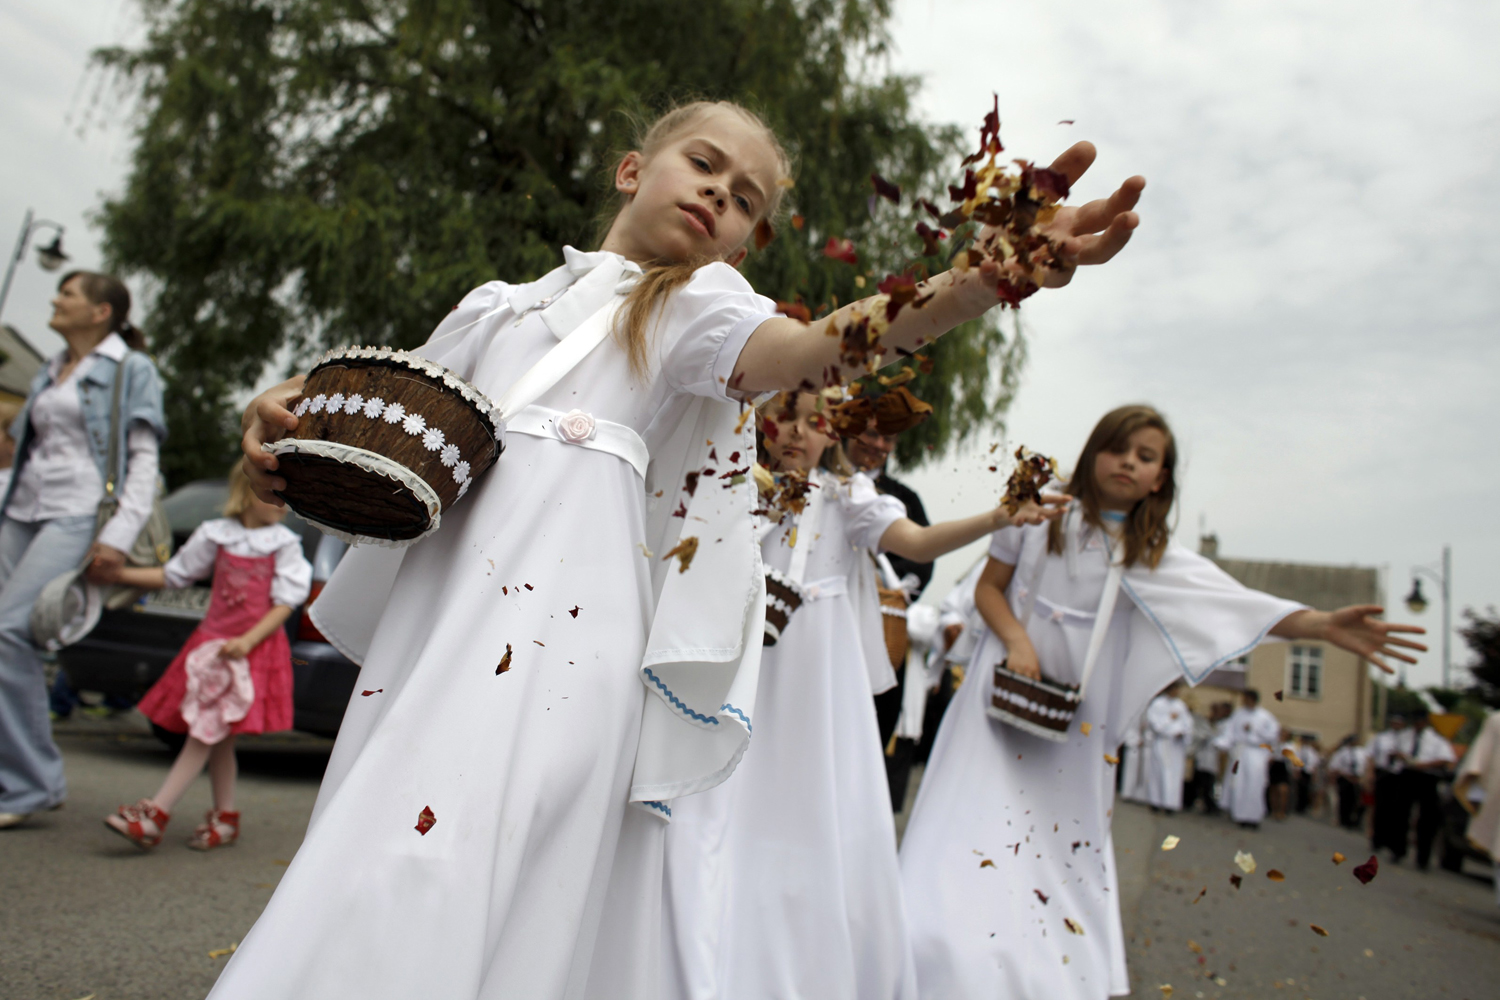 Girls throw flower petals before the Blessed Sacrament during a Corpus Christi procession in Gora Kalwaria